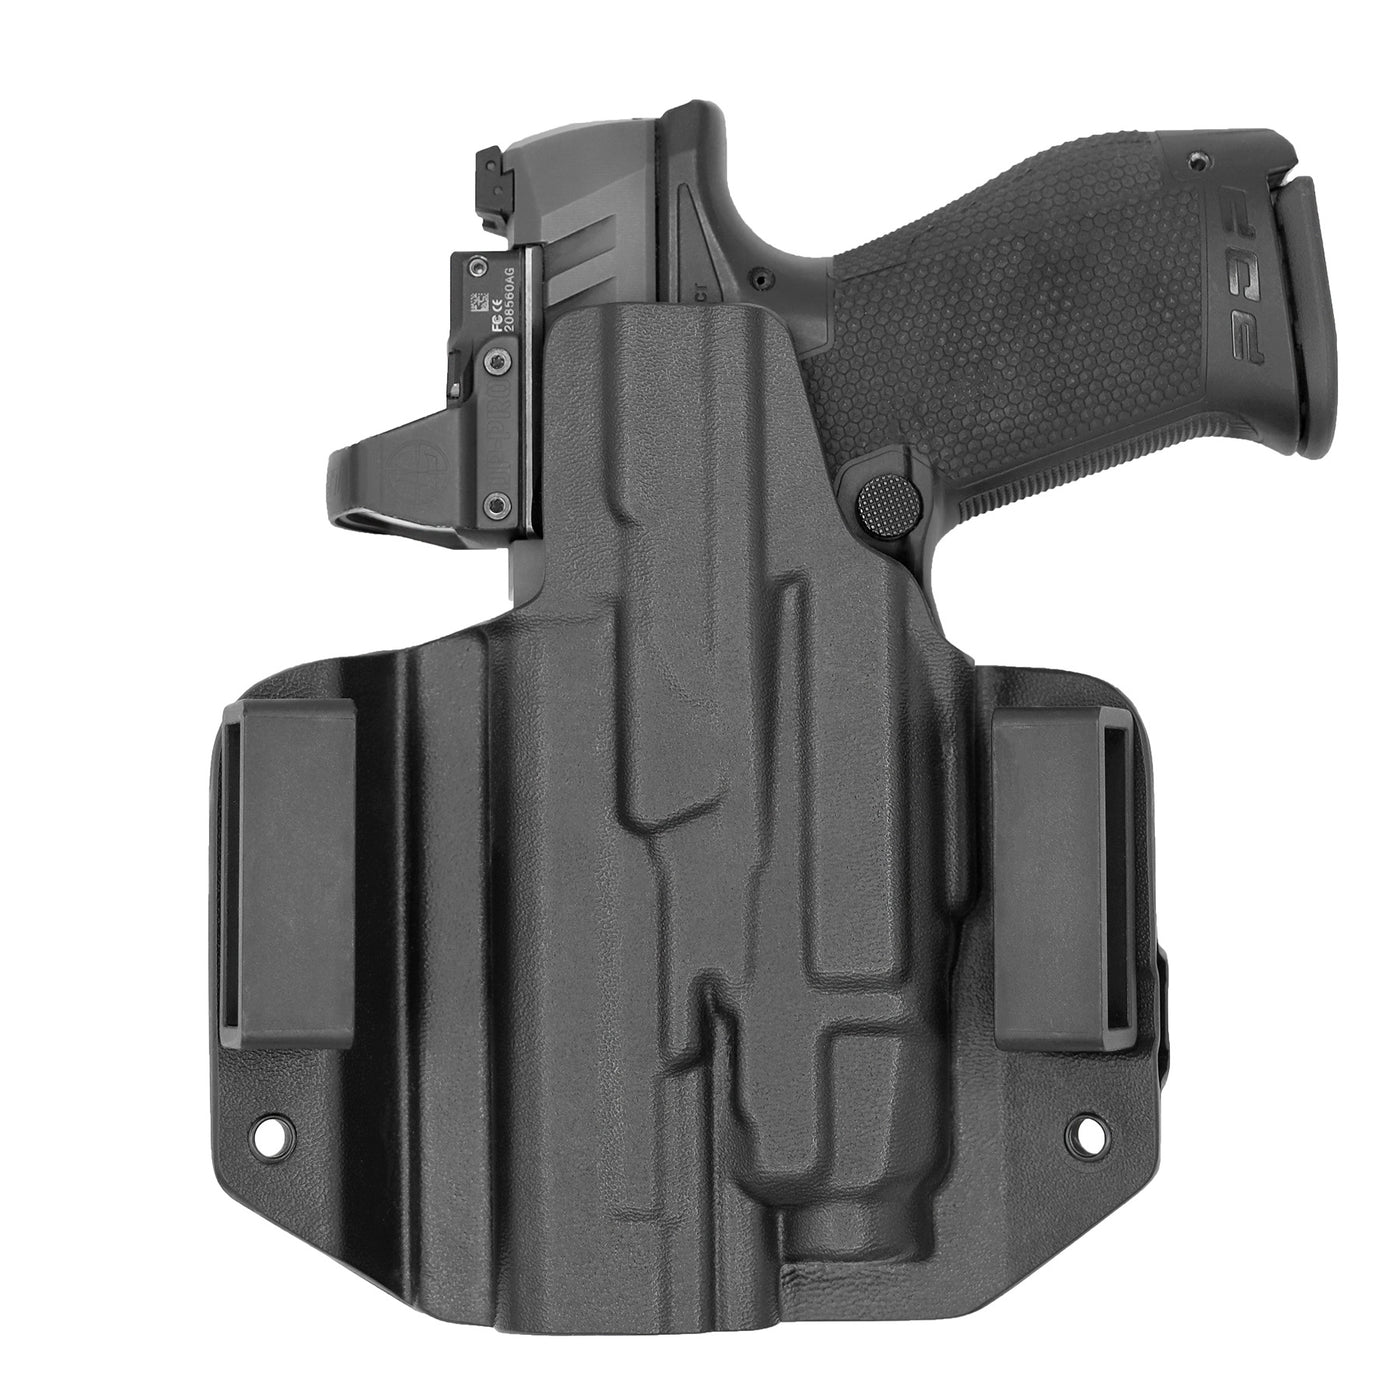 C&G Holsters quickship OWB Tactical H&K vp9/sk streamlight tlr7/a in holstered position back view